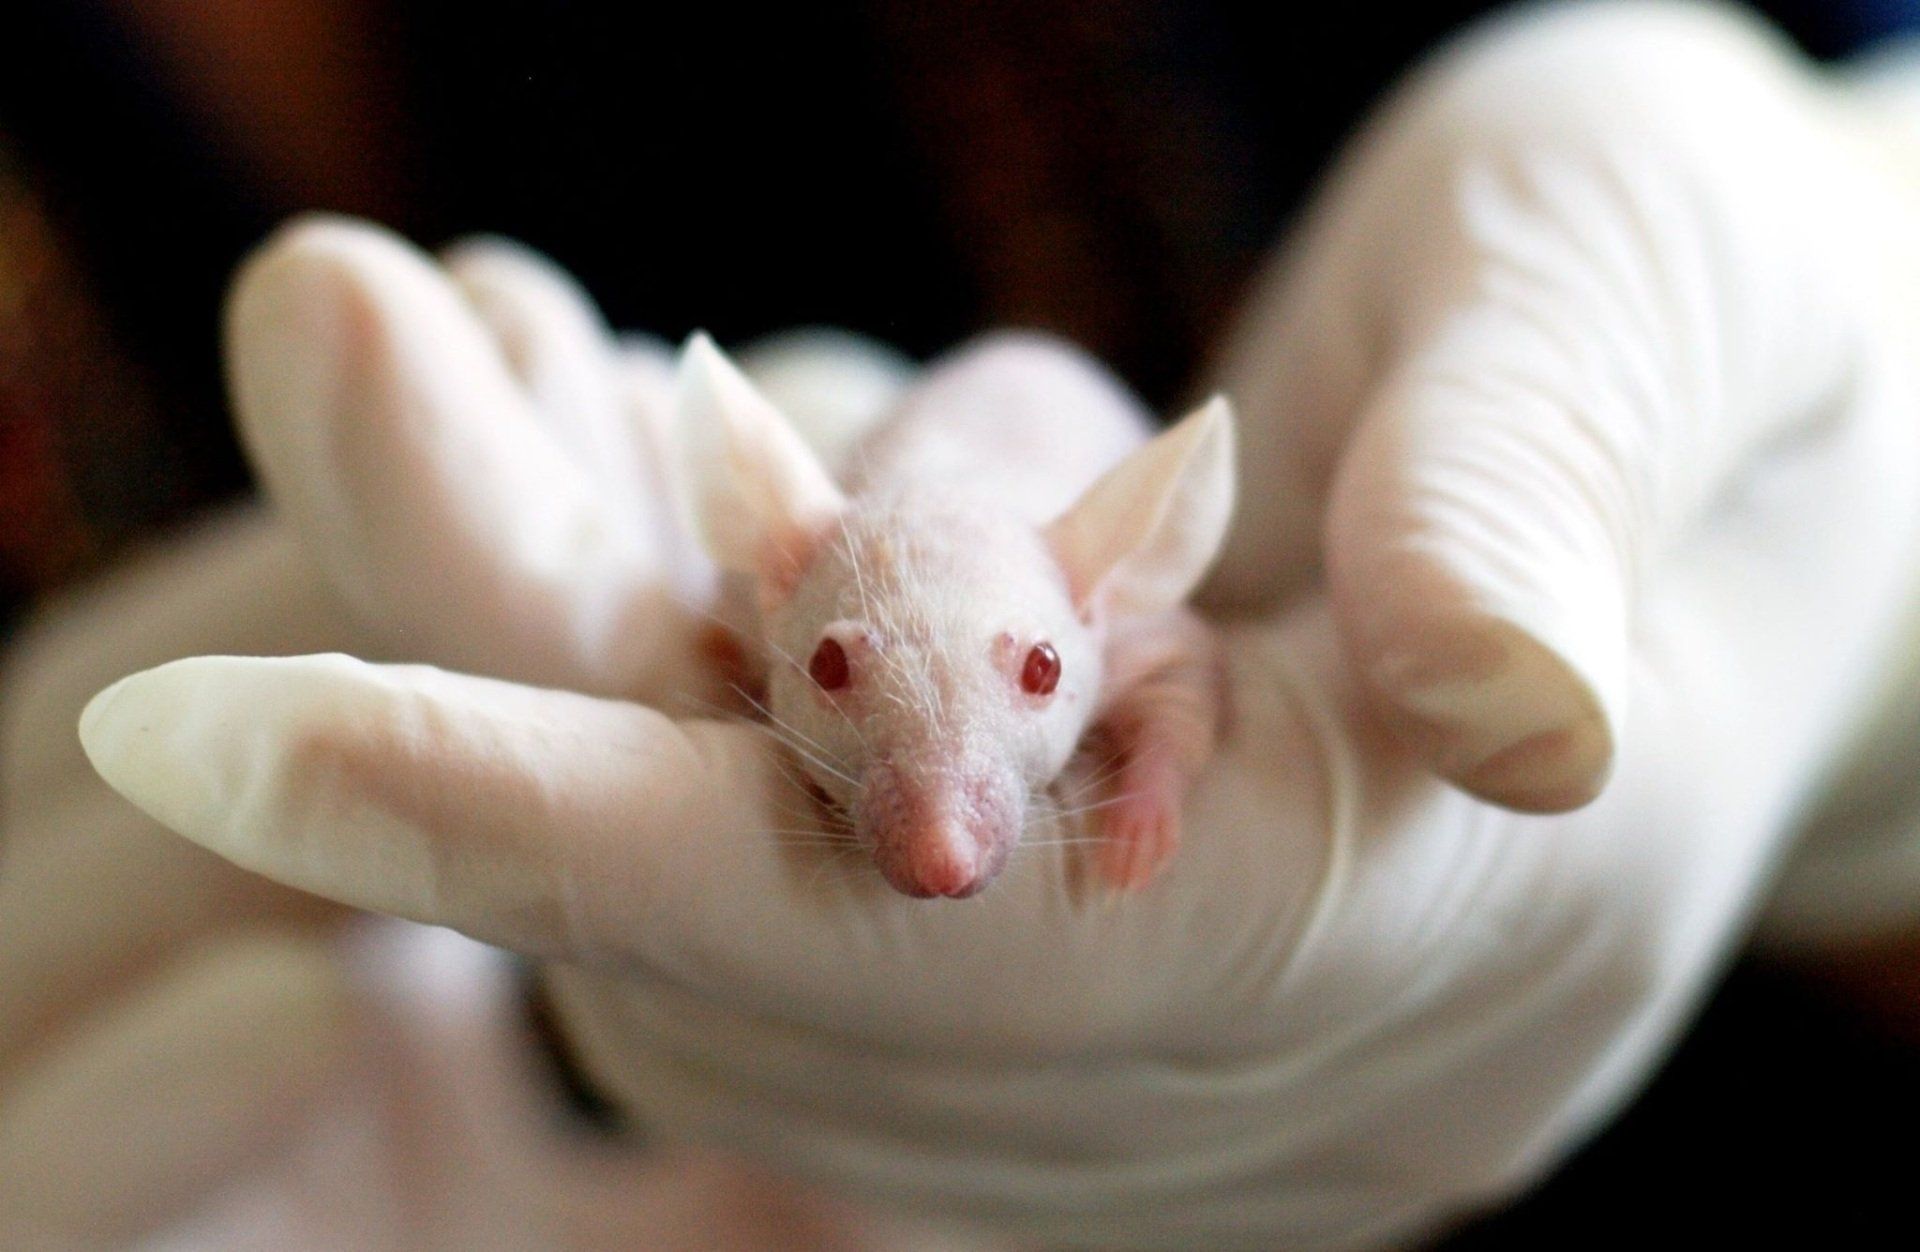 A white lab mouse in the hands of a lab worker wearing white rubber gloves